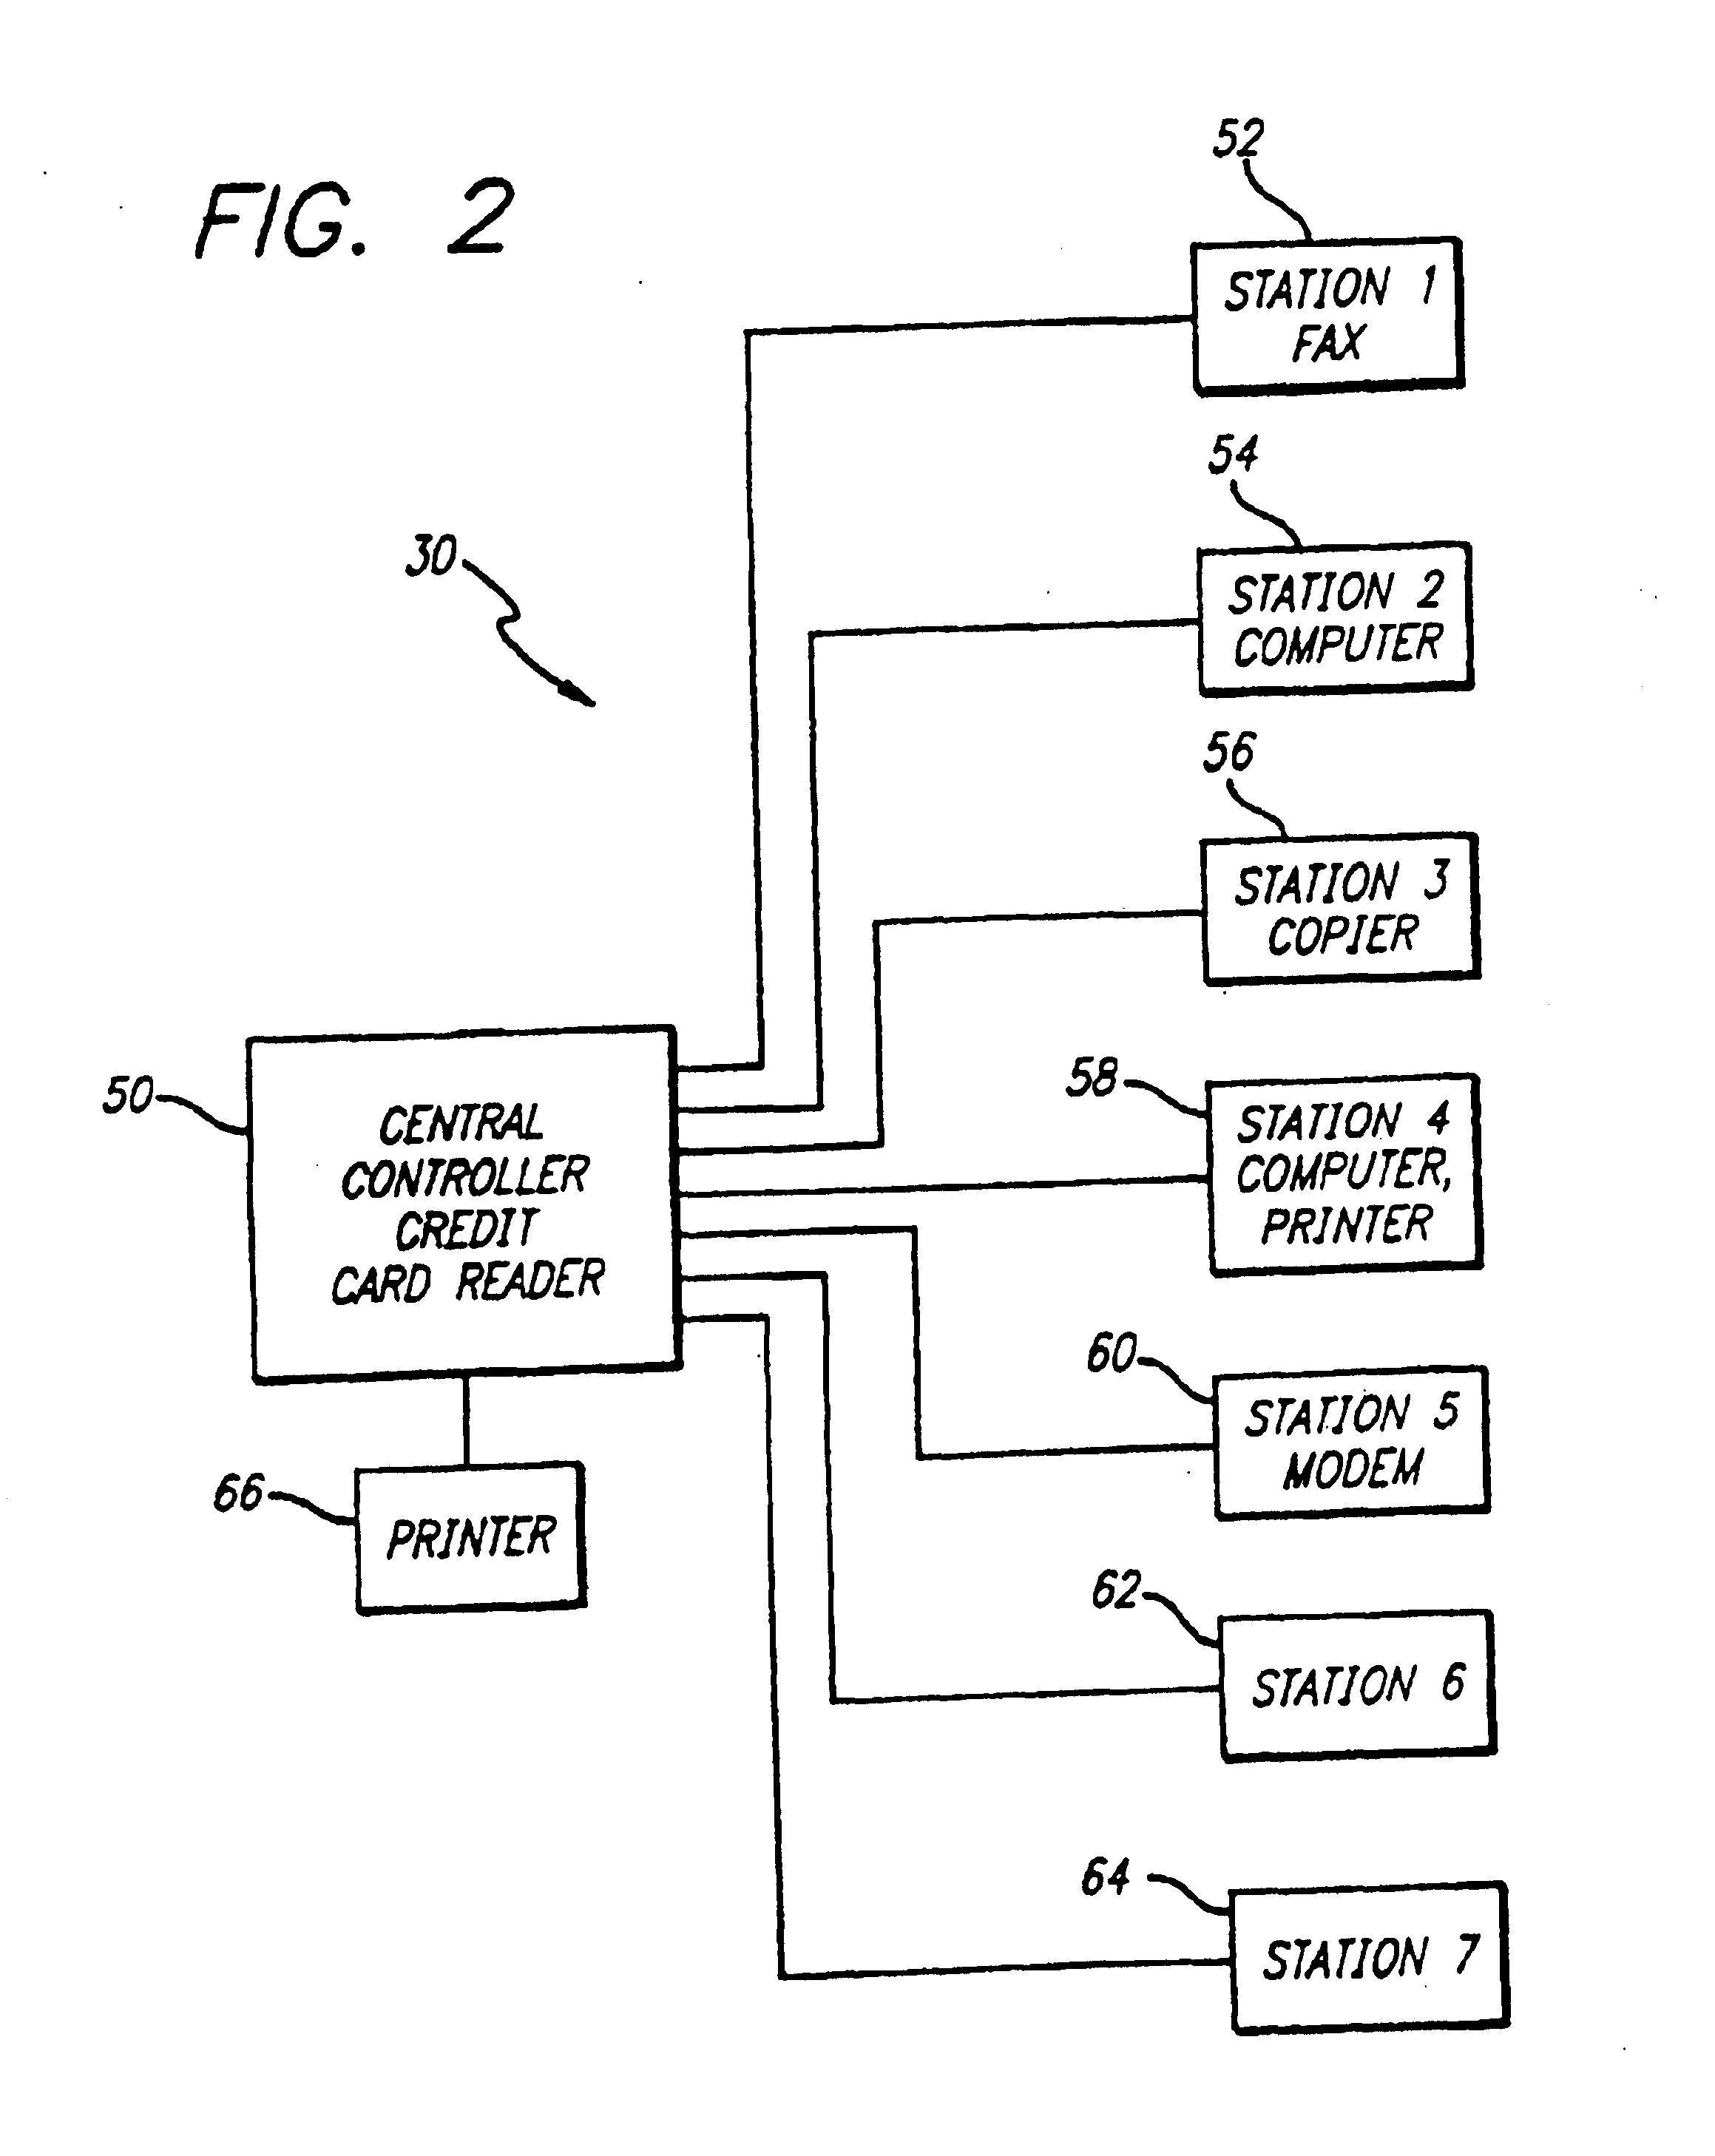 Method and apparatus for vending machine controller configured to monitor and analyze power profiles for plurality of motor coils to determine condition of vending machine